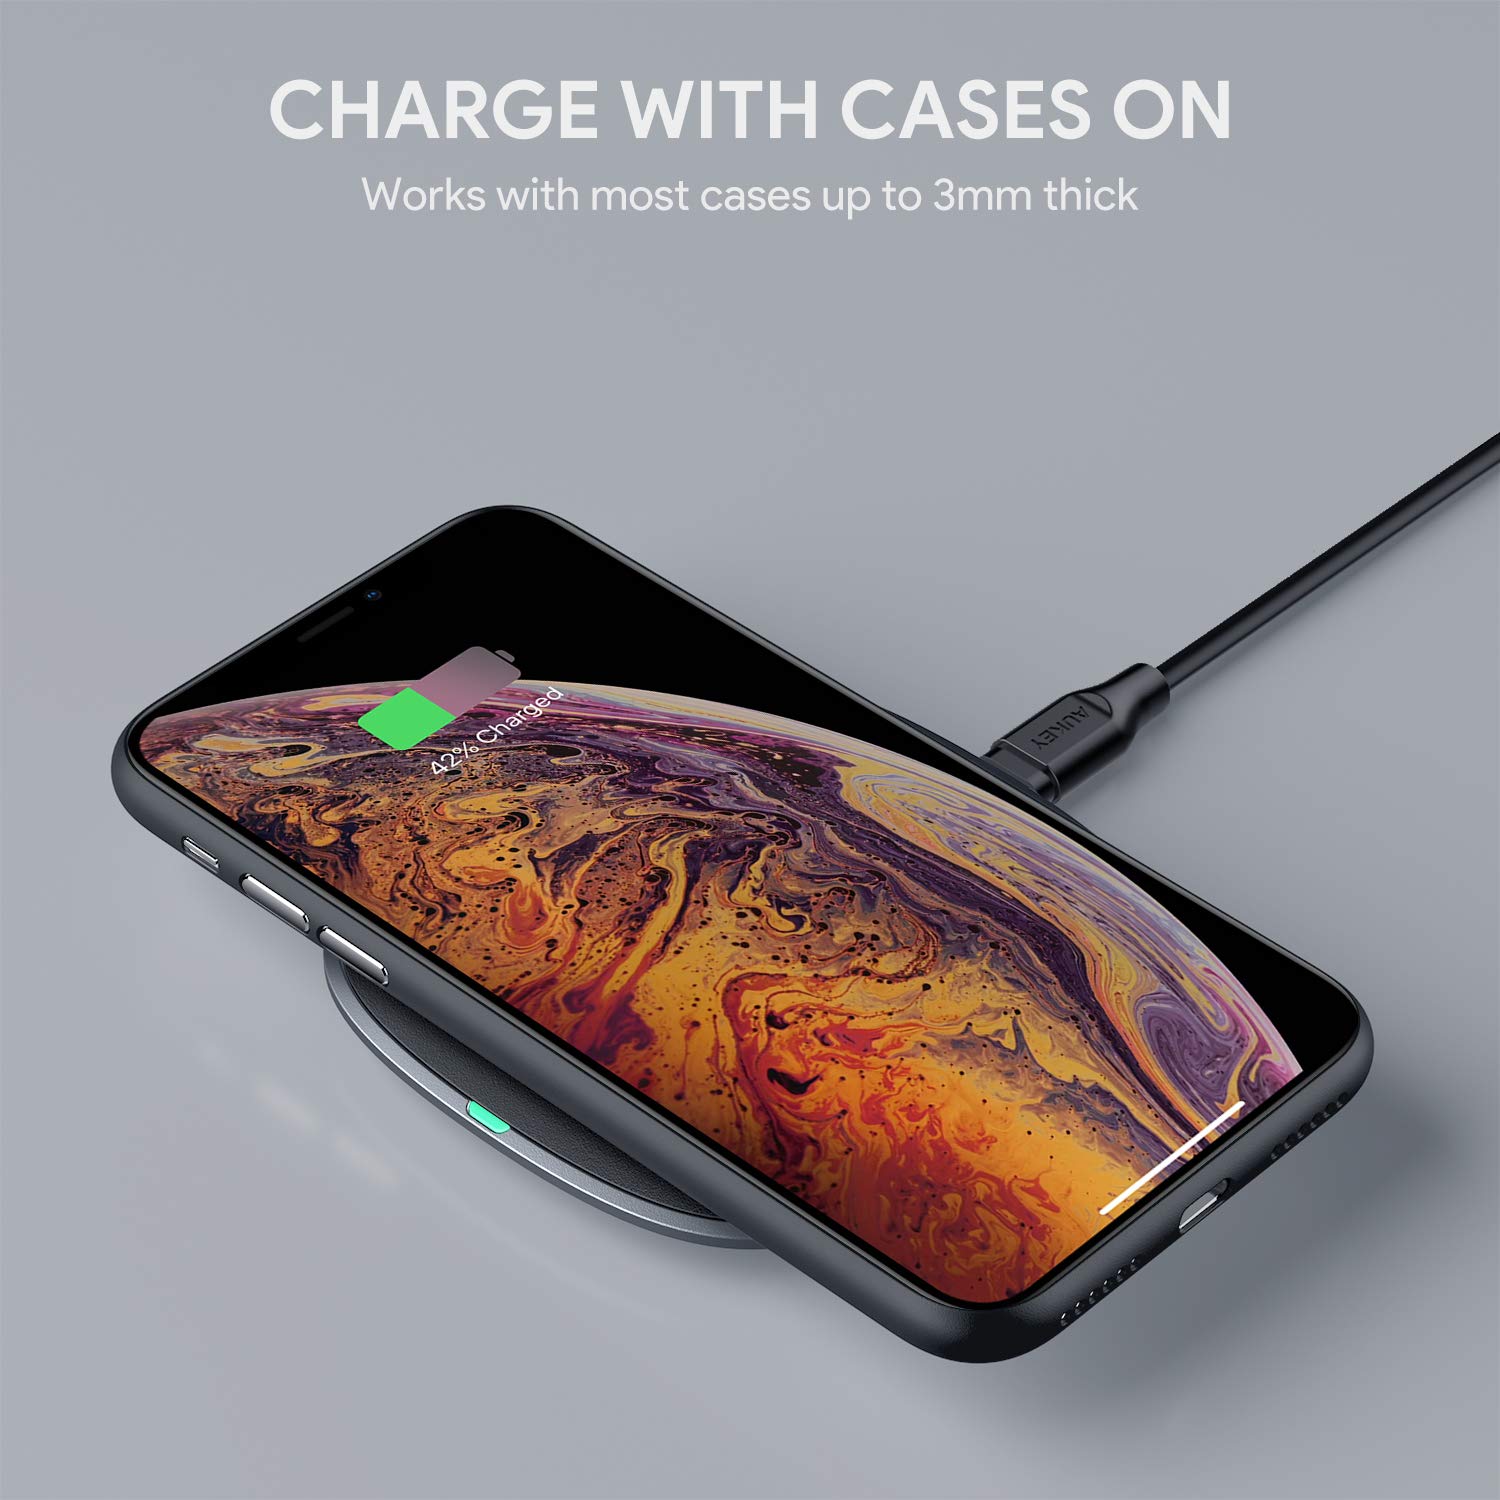 CHARGE WITH CASES ON Works with most cases up to 3mm thick